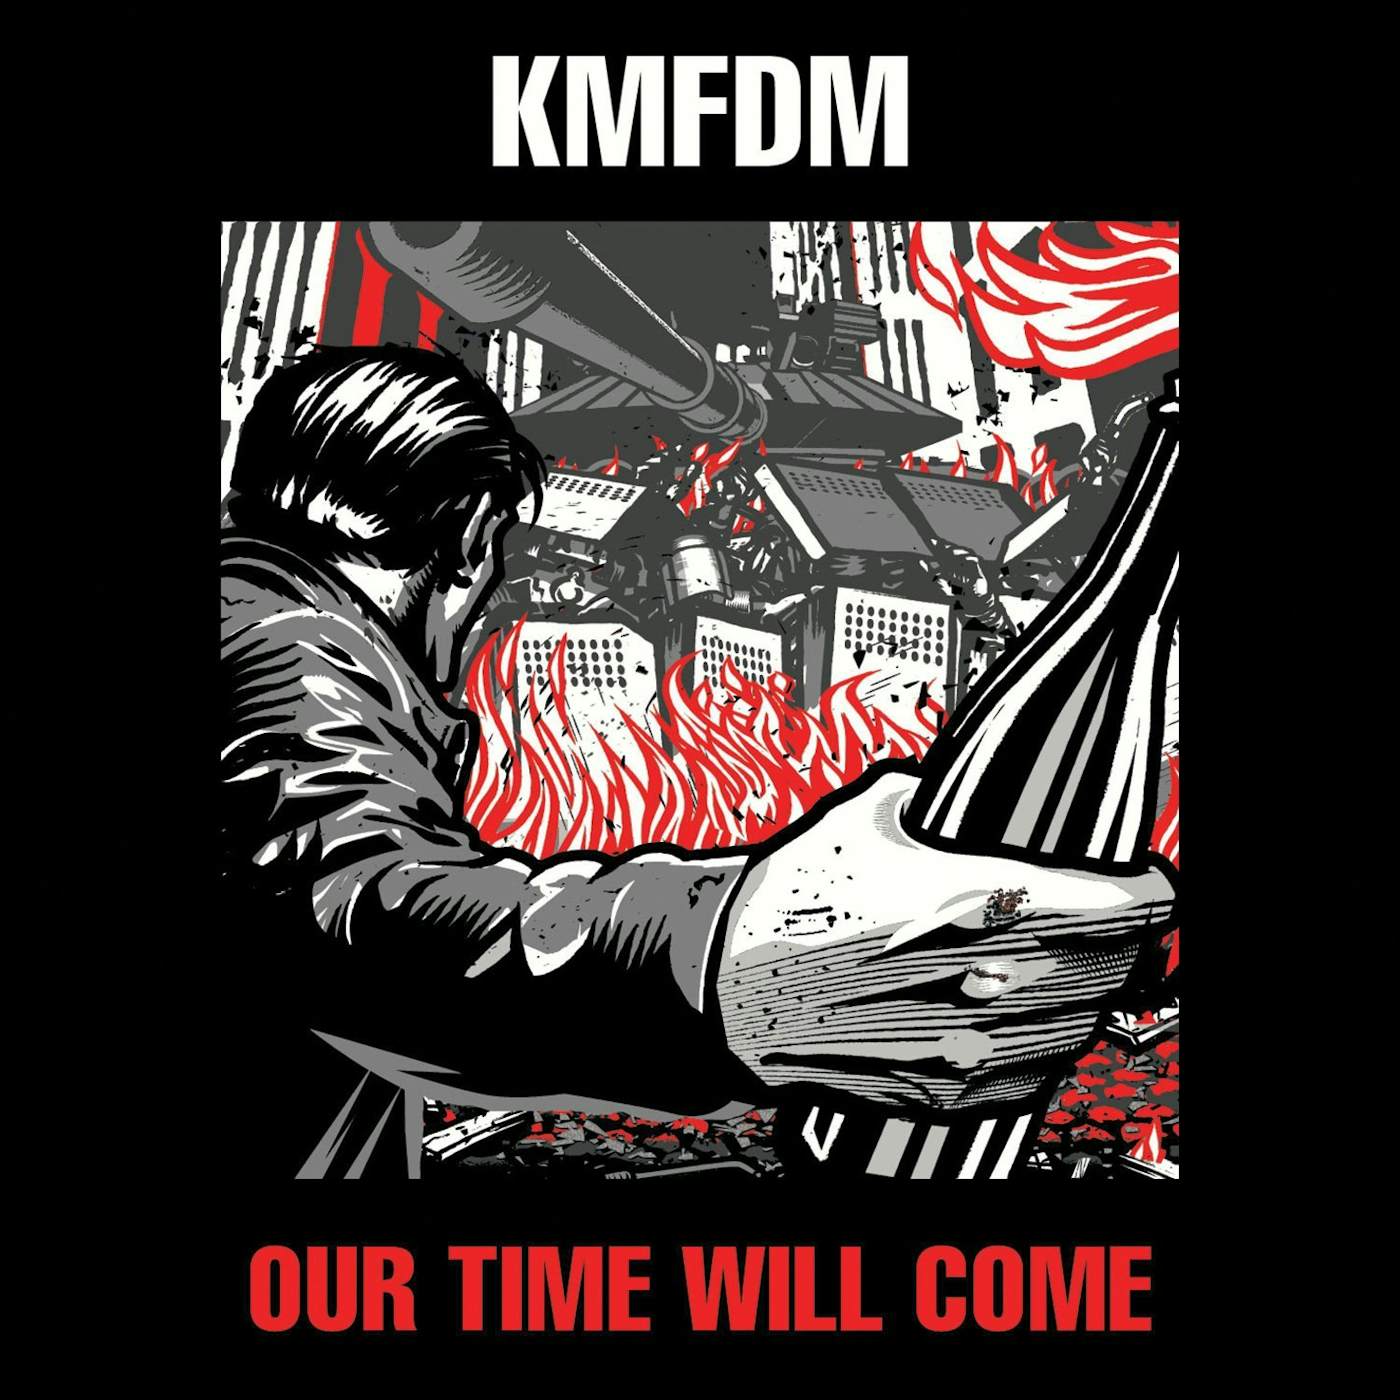 KMFDM OUR TIME WILL COME CD